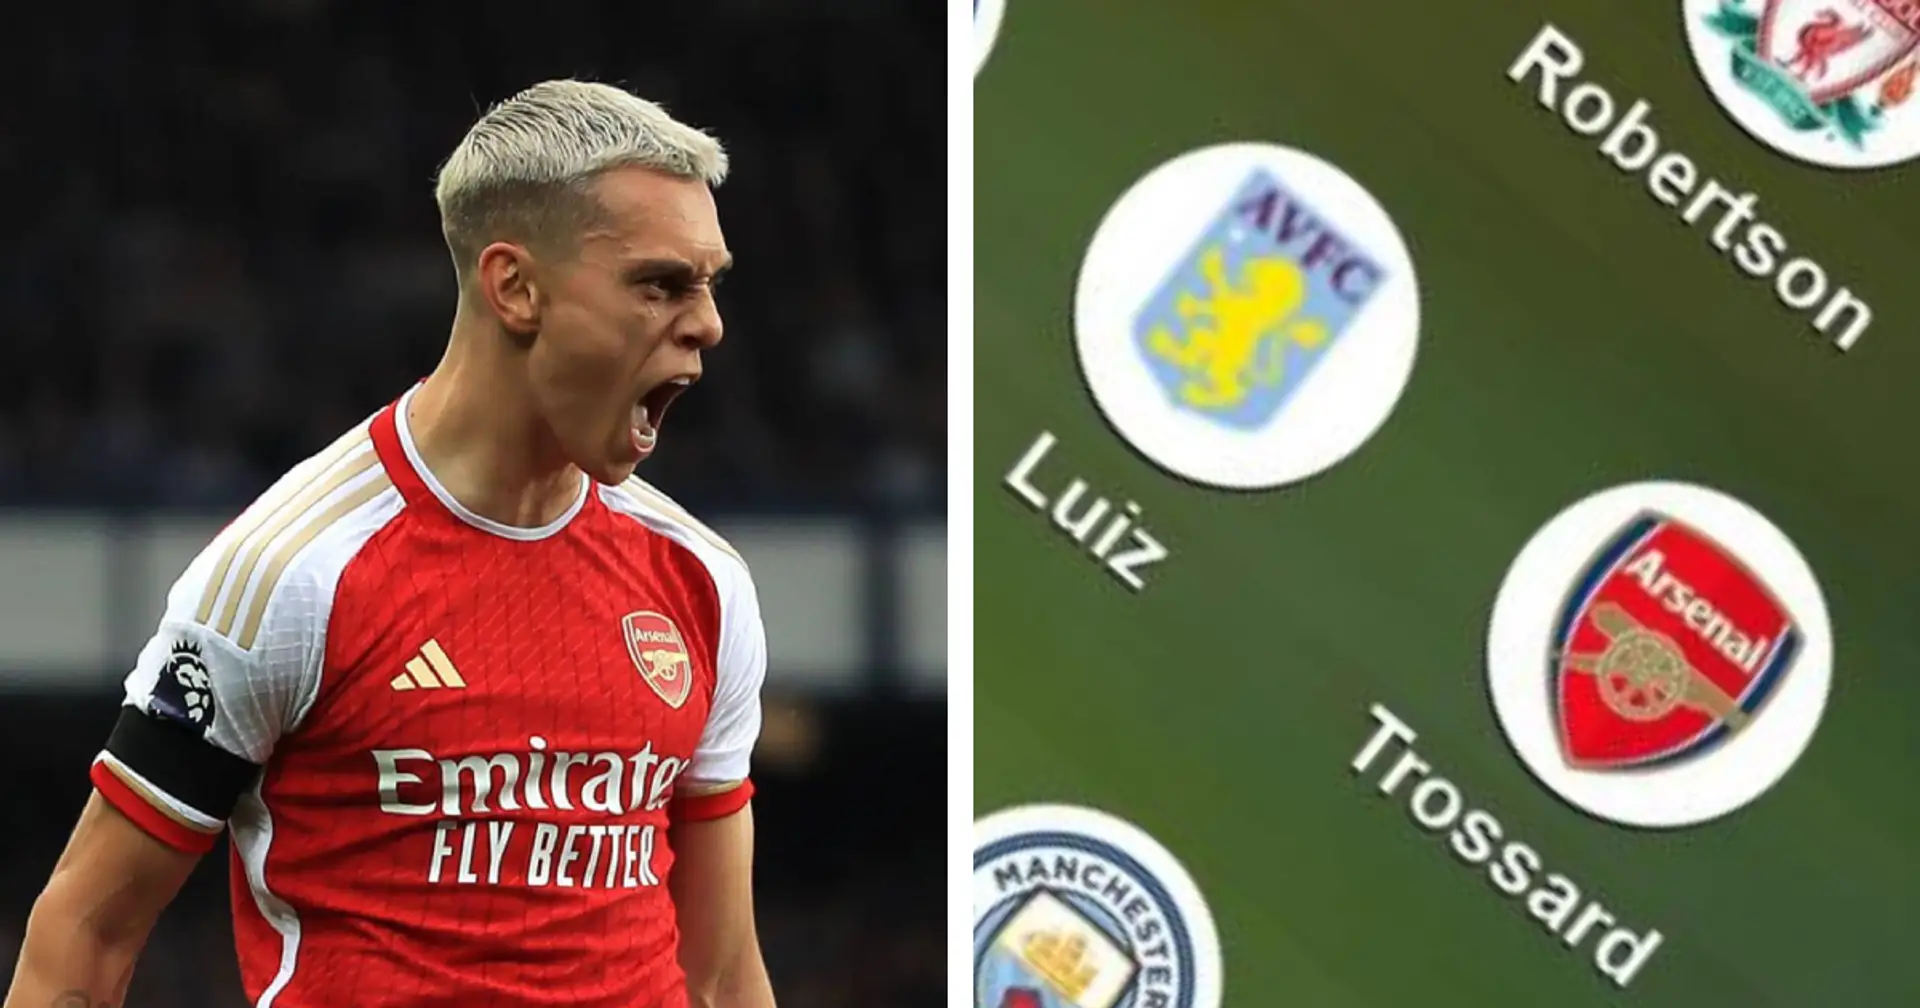 2 Arsenal players make BBC's Team of the Week — one is Trossard, of course